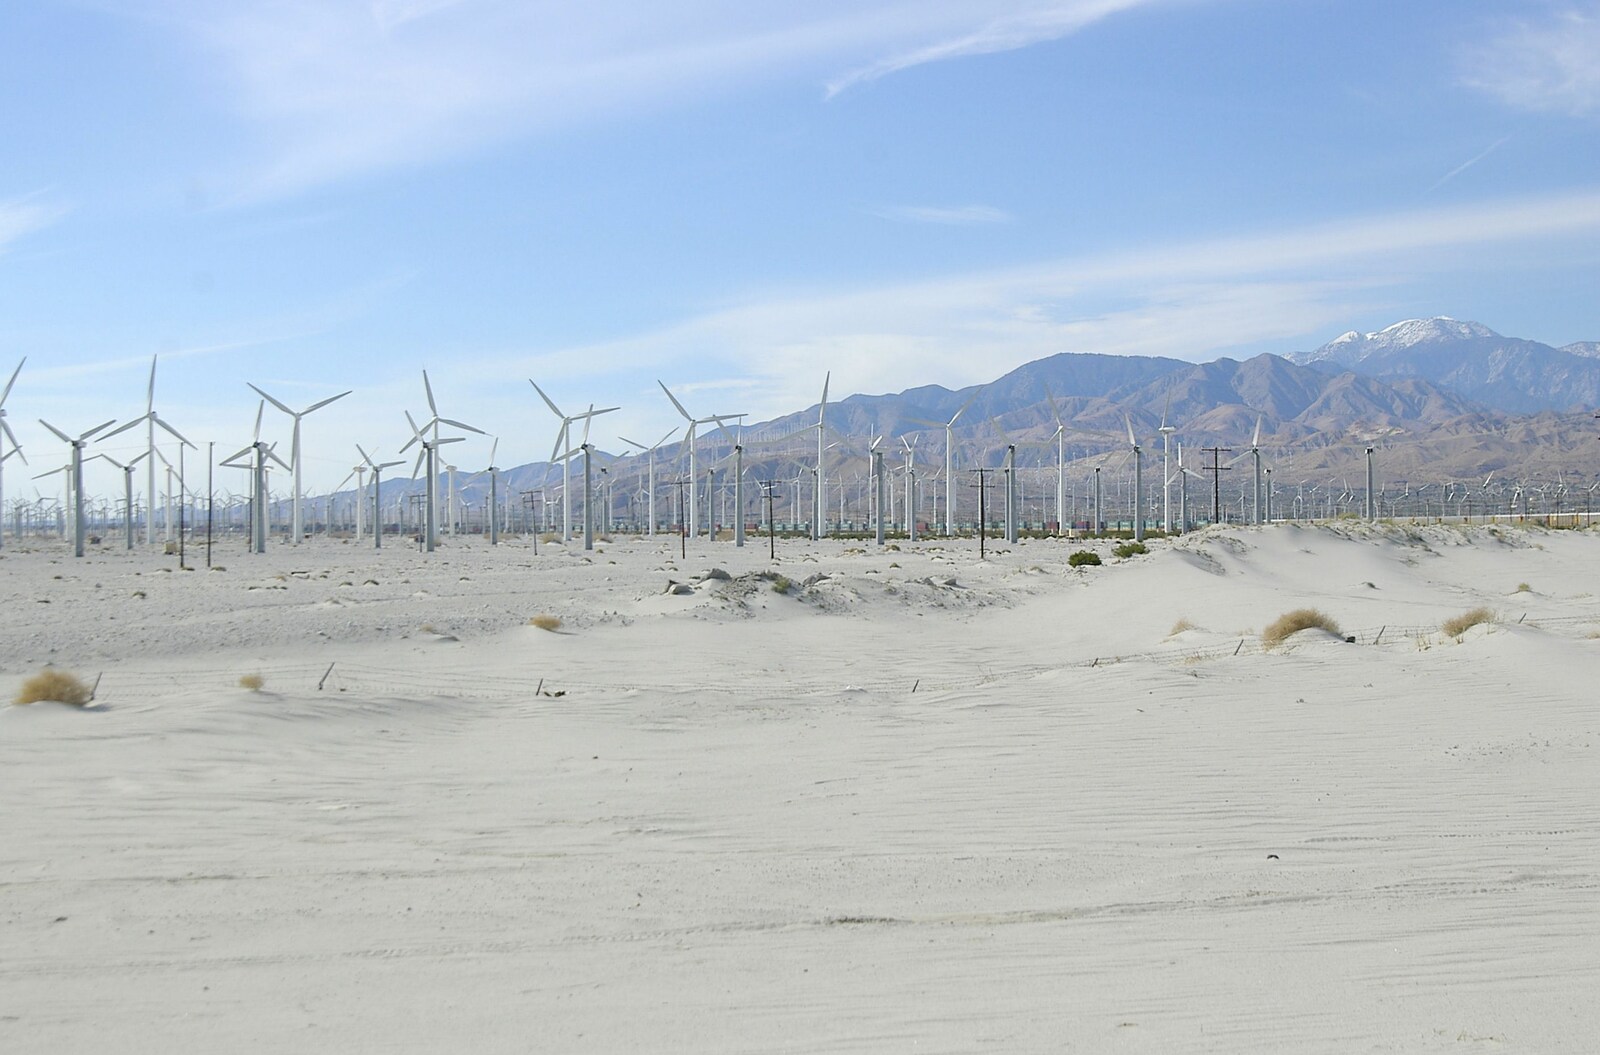 Wind turbines in the white sands from Mojave Desert: San Diego to Joshua Tree and Twentynine Palms, California, US - 5th March 2006